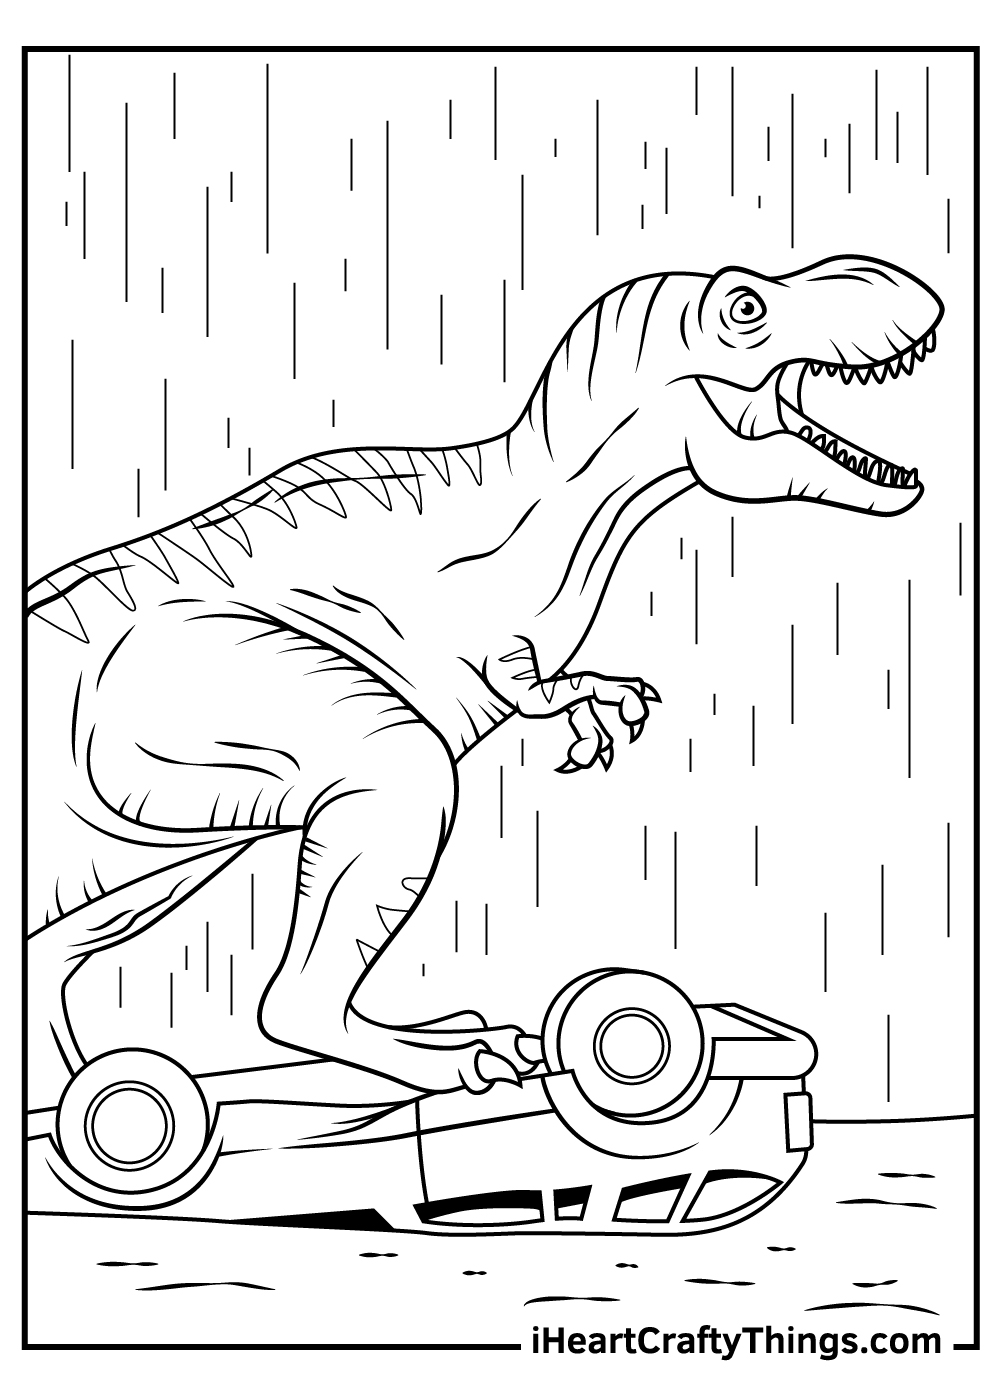 Jurassic Park Coloring Pages To Print Free